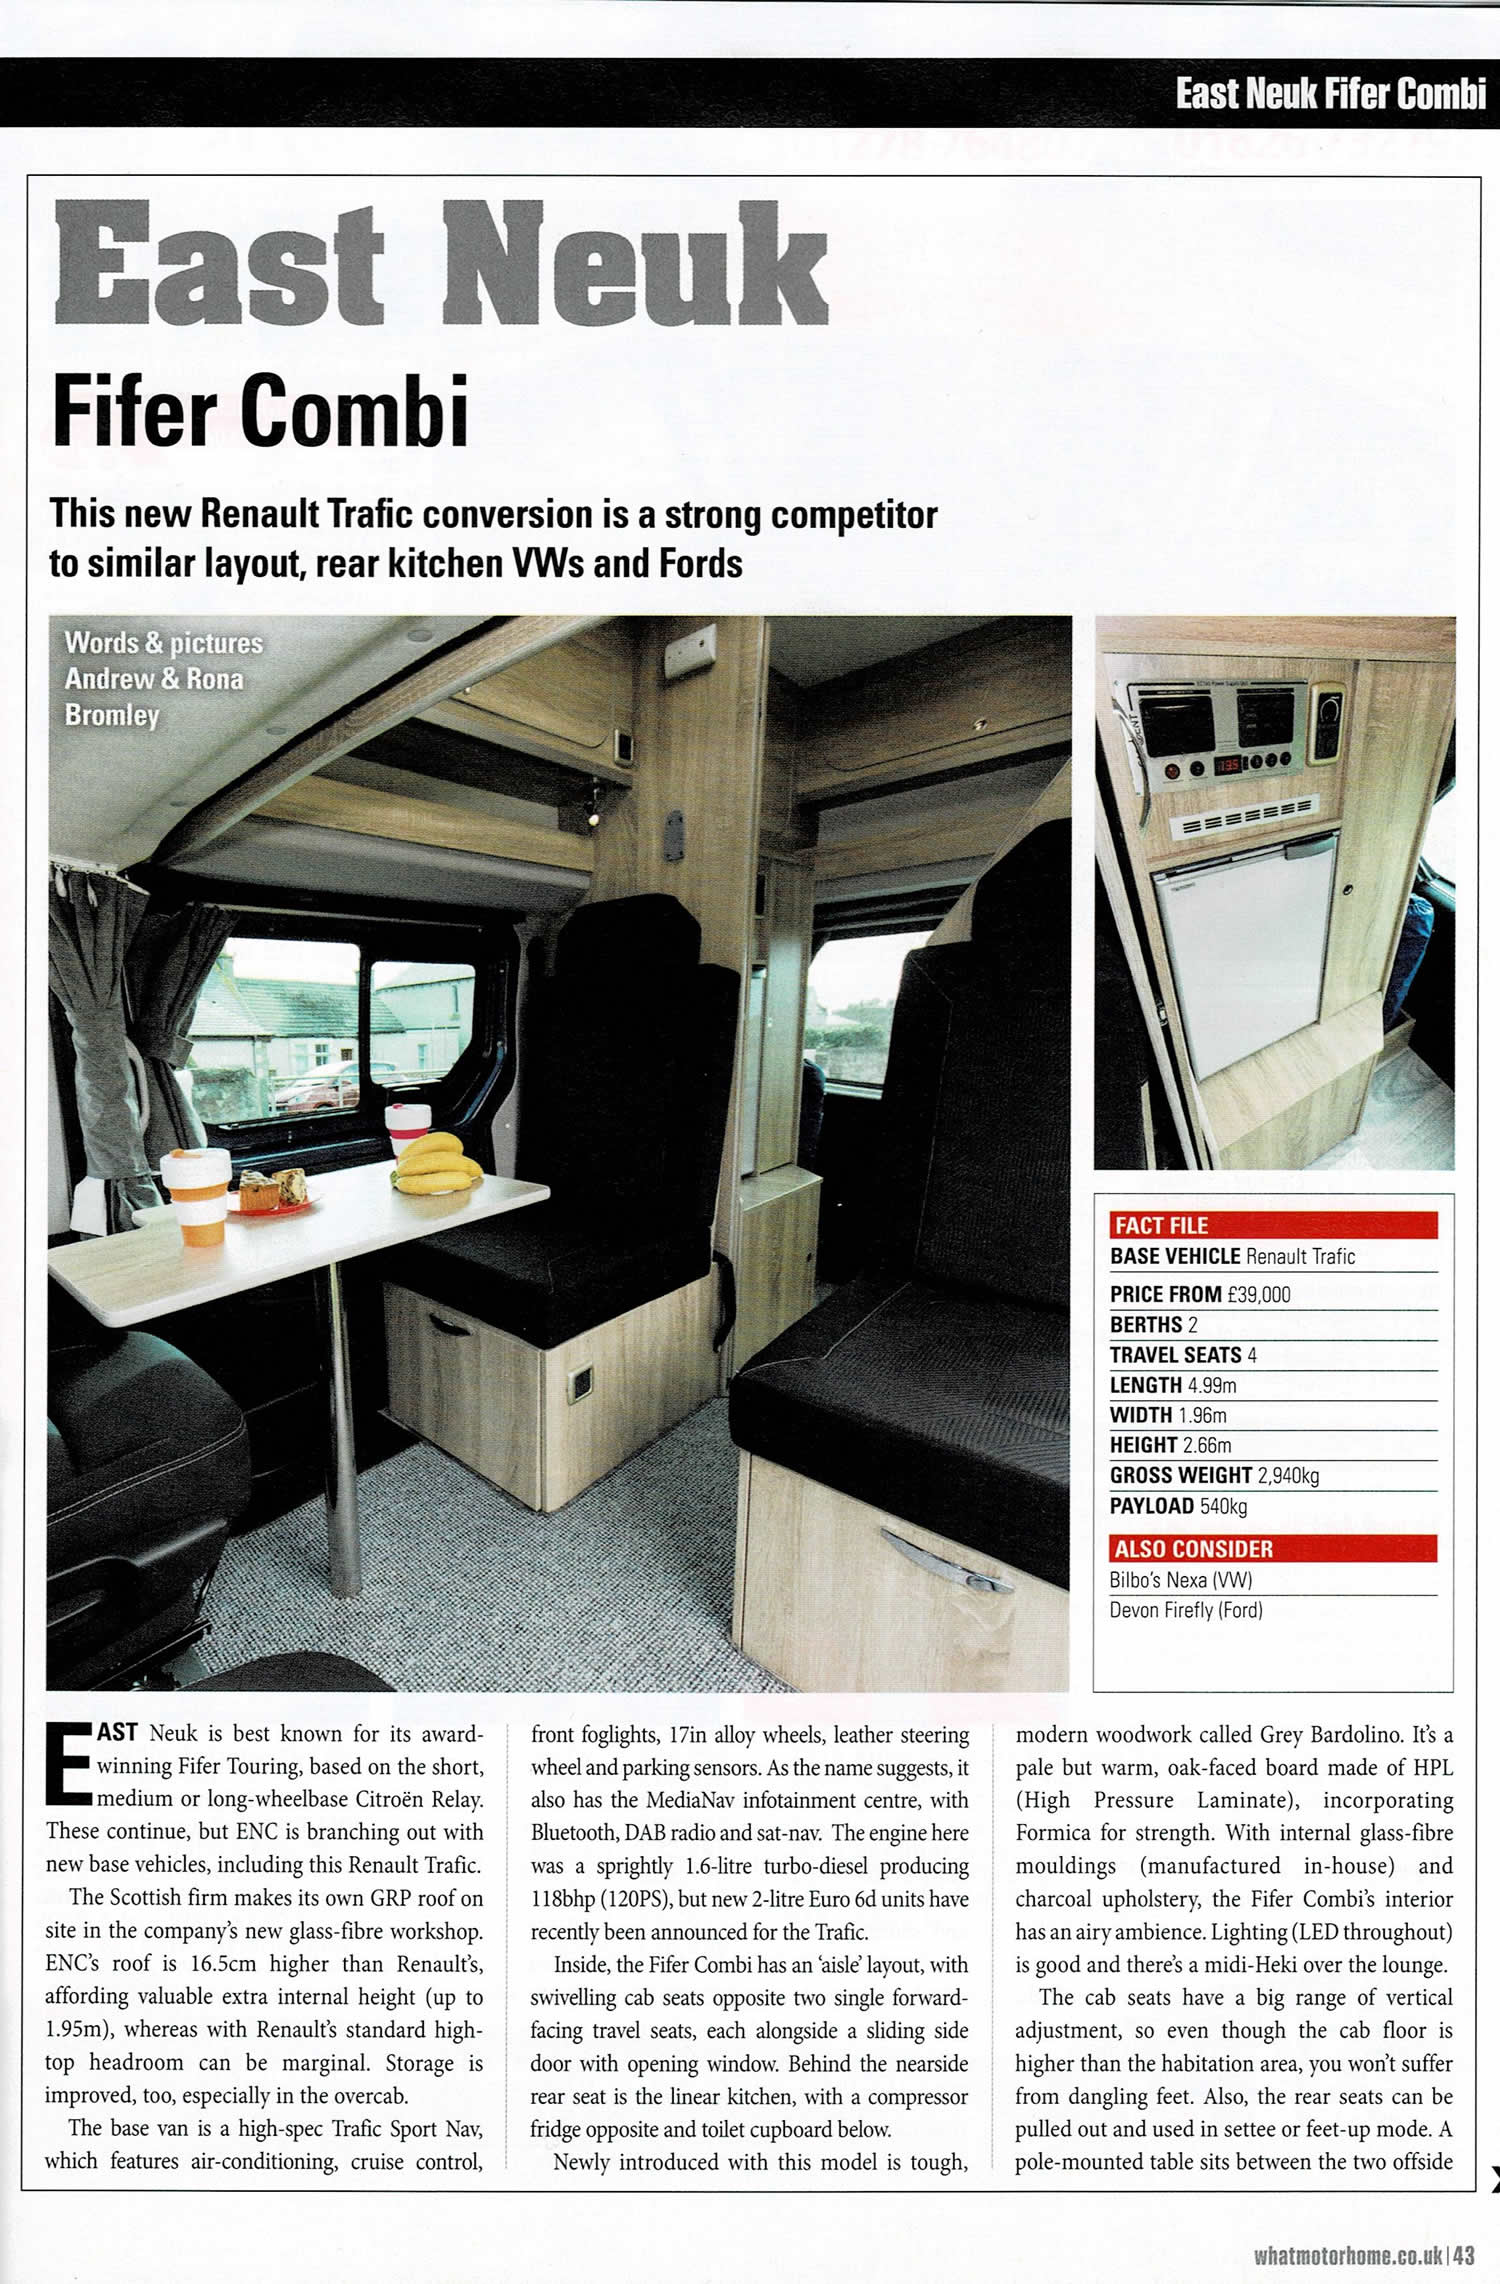 Fifer Combi What Motorhome Review page 1